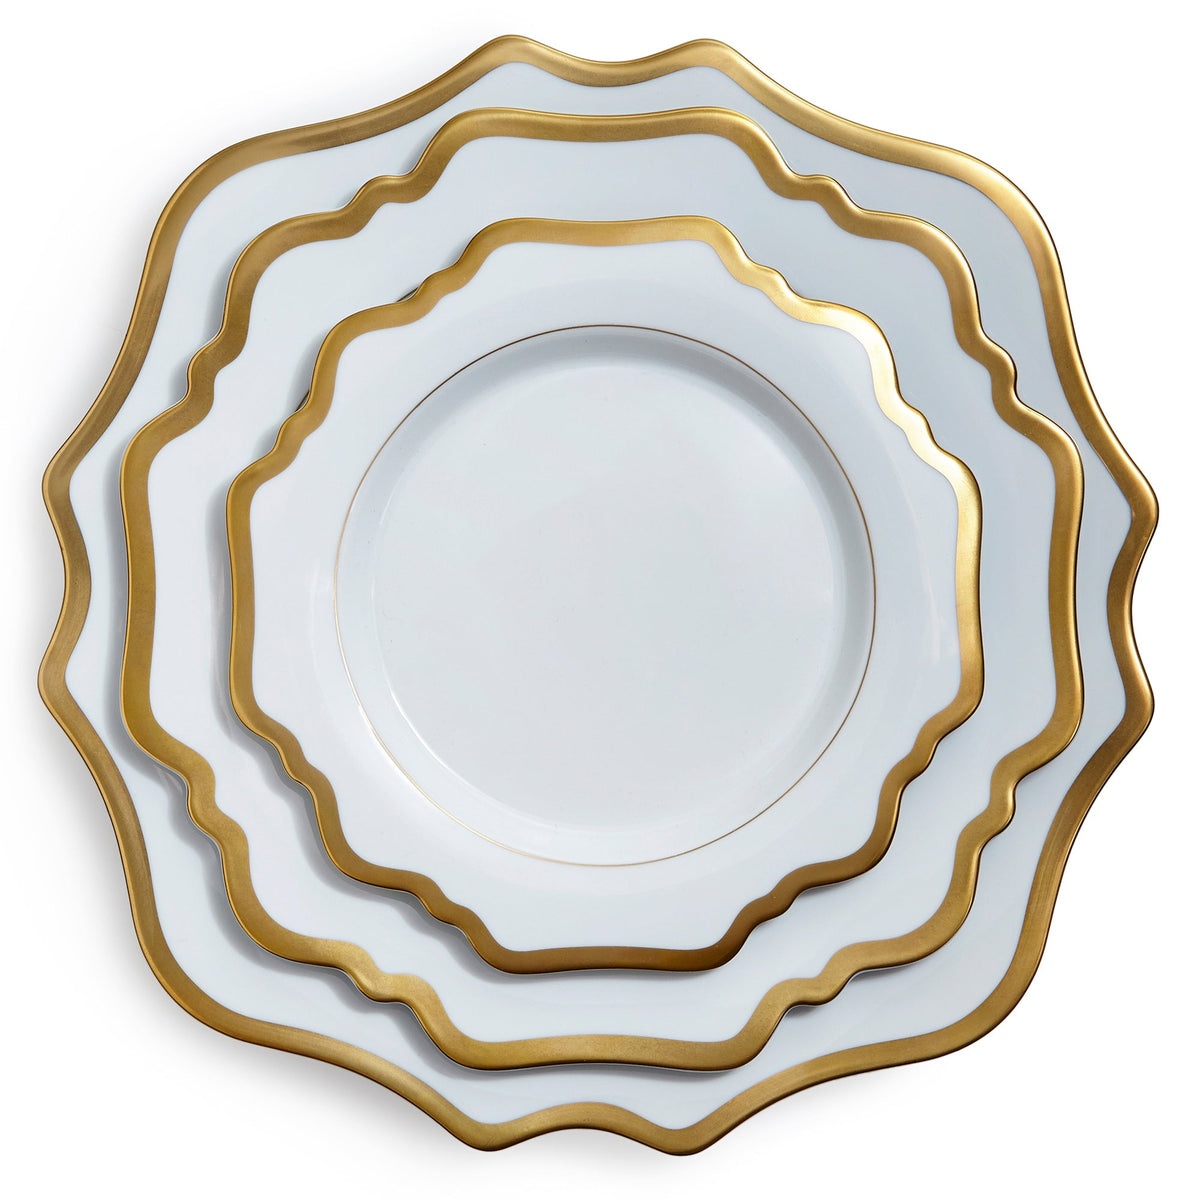 Antique White and Gold Dinner Plate